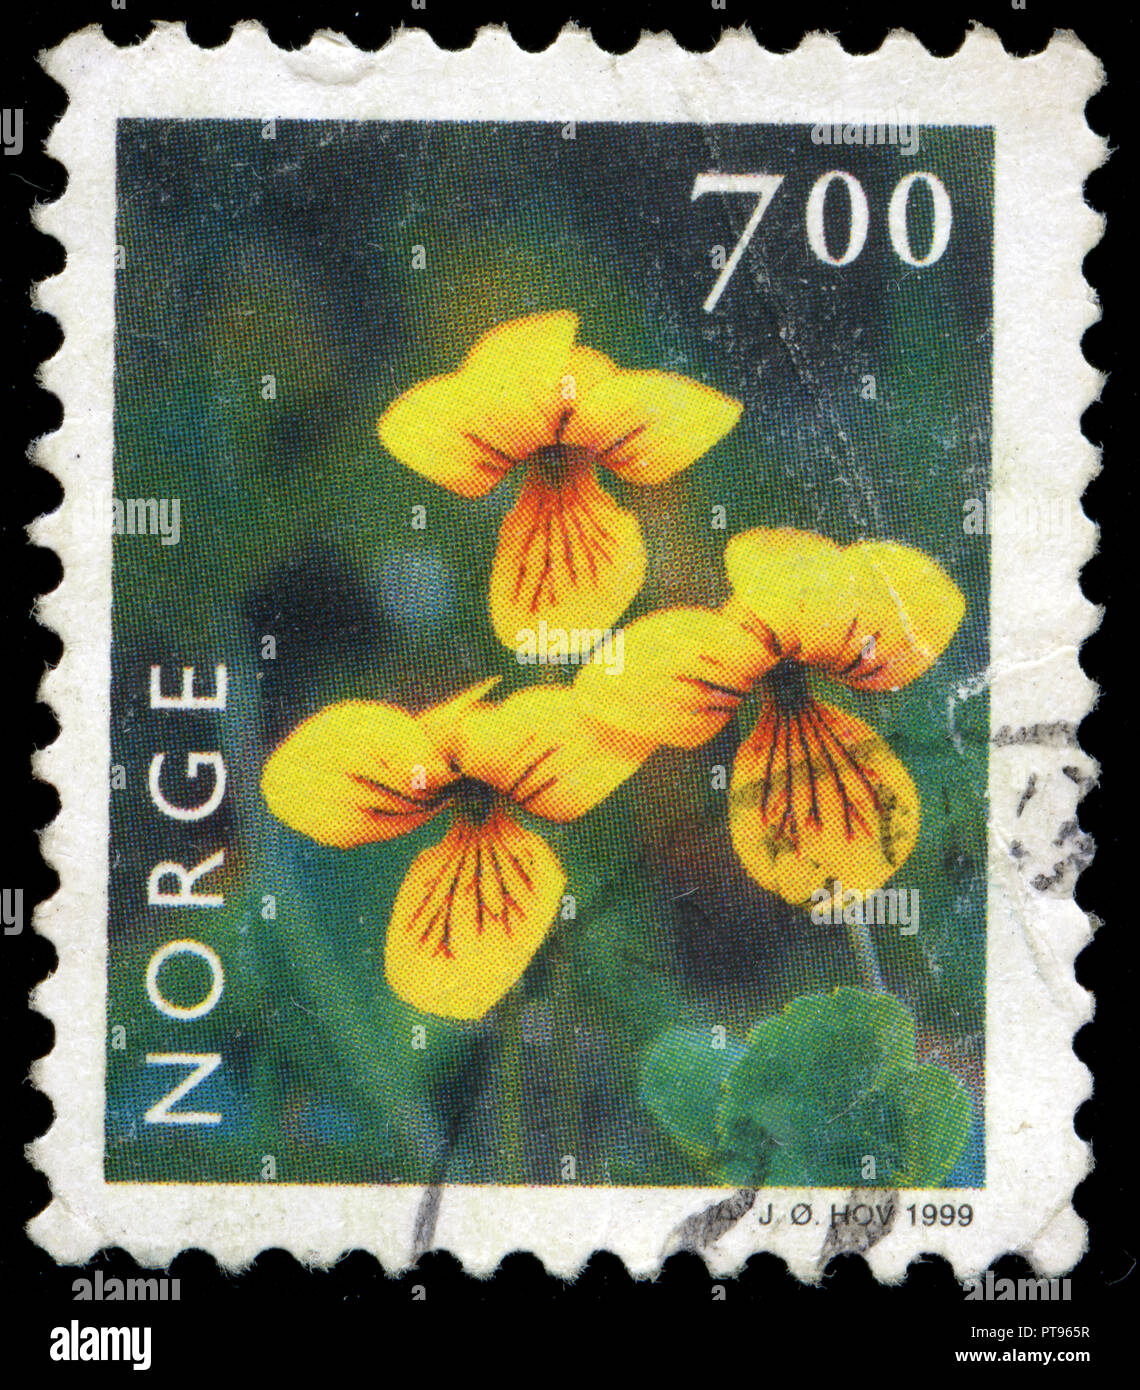 Postmarked stamp from Norway in the Flowers series issued in 1999 Stock Photo